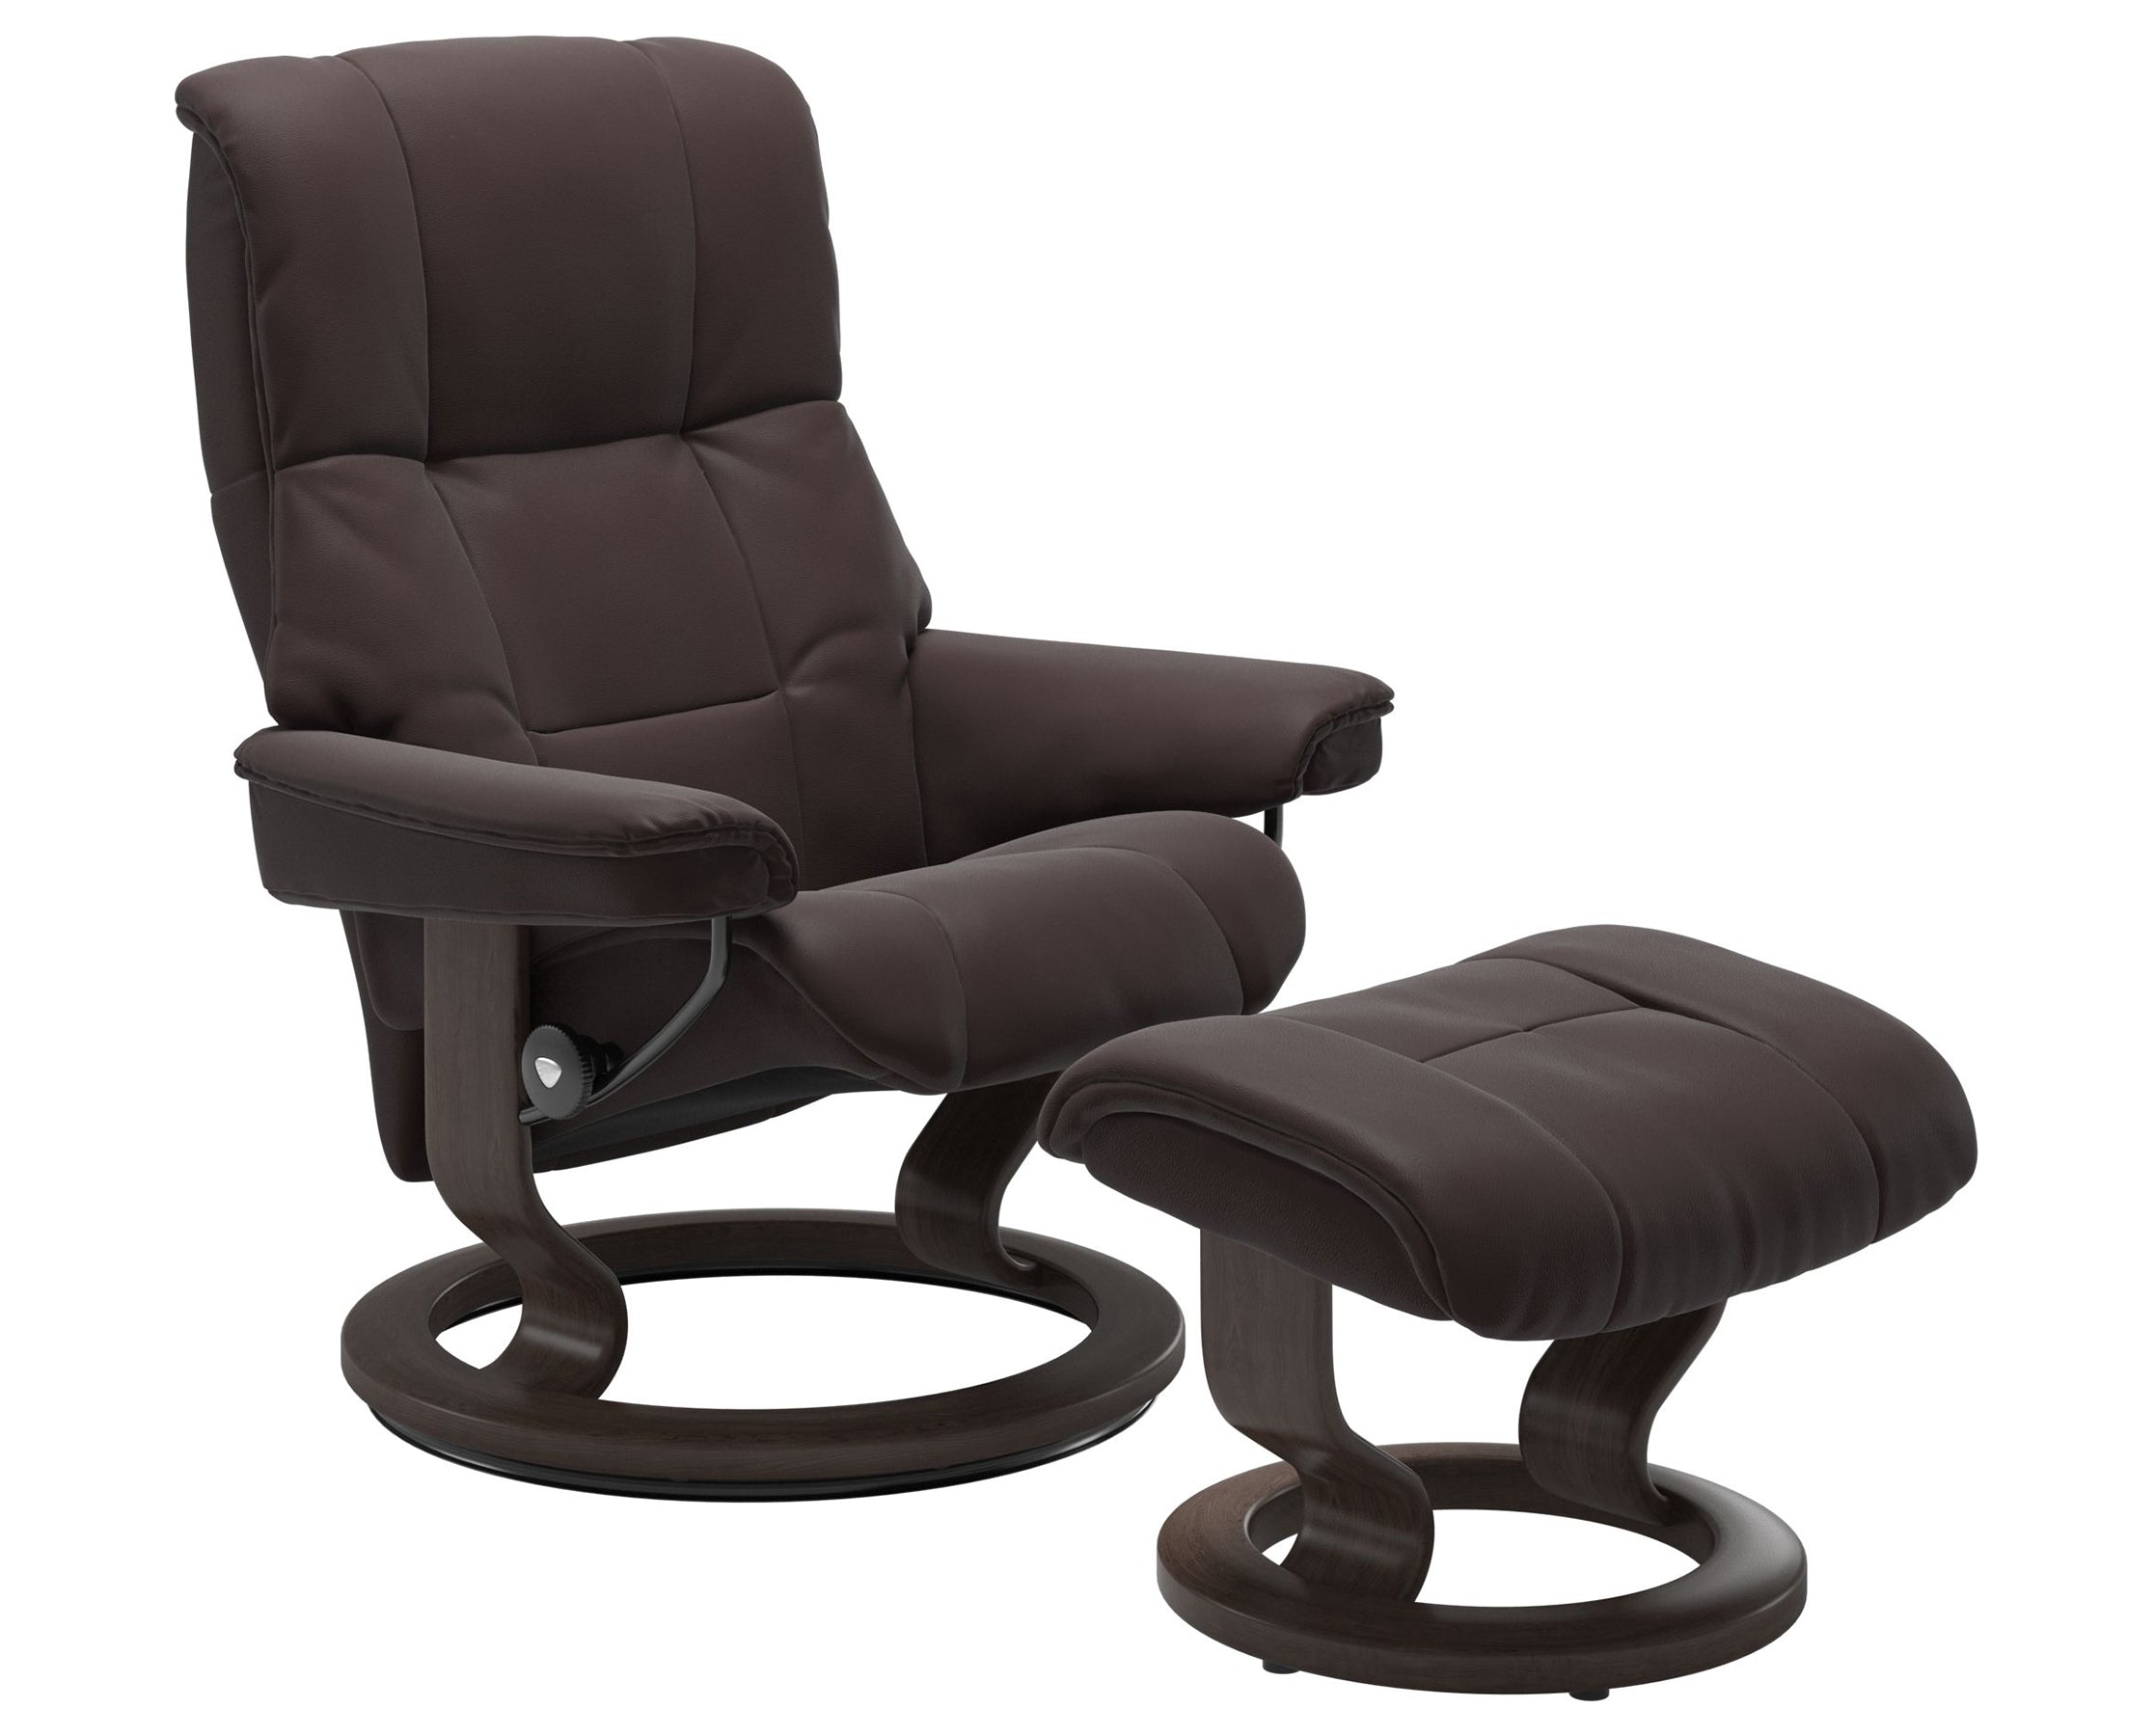 Paloma Leather Chocolate S/M/L and Wenge Base | Stressless Mayfair Classic Recliner | Valley Ridge Furniture